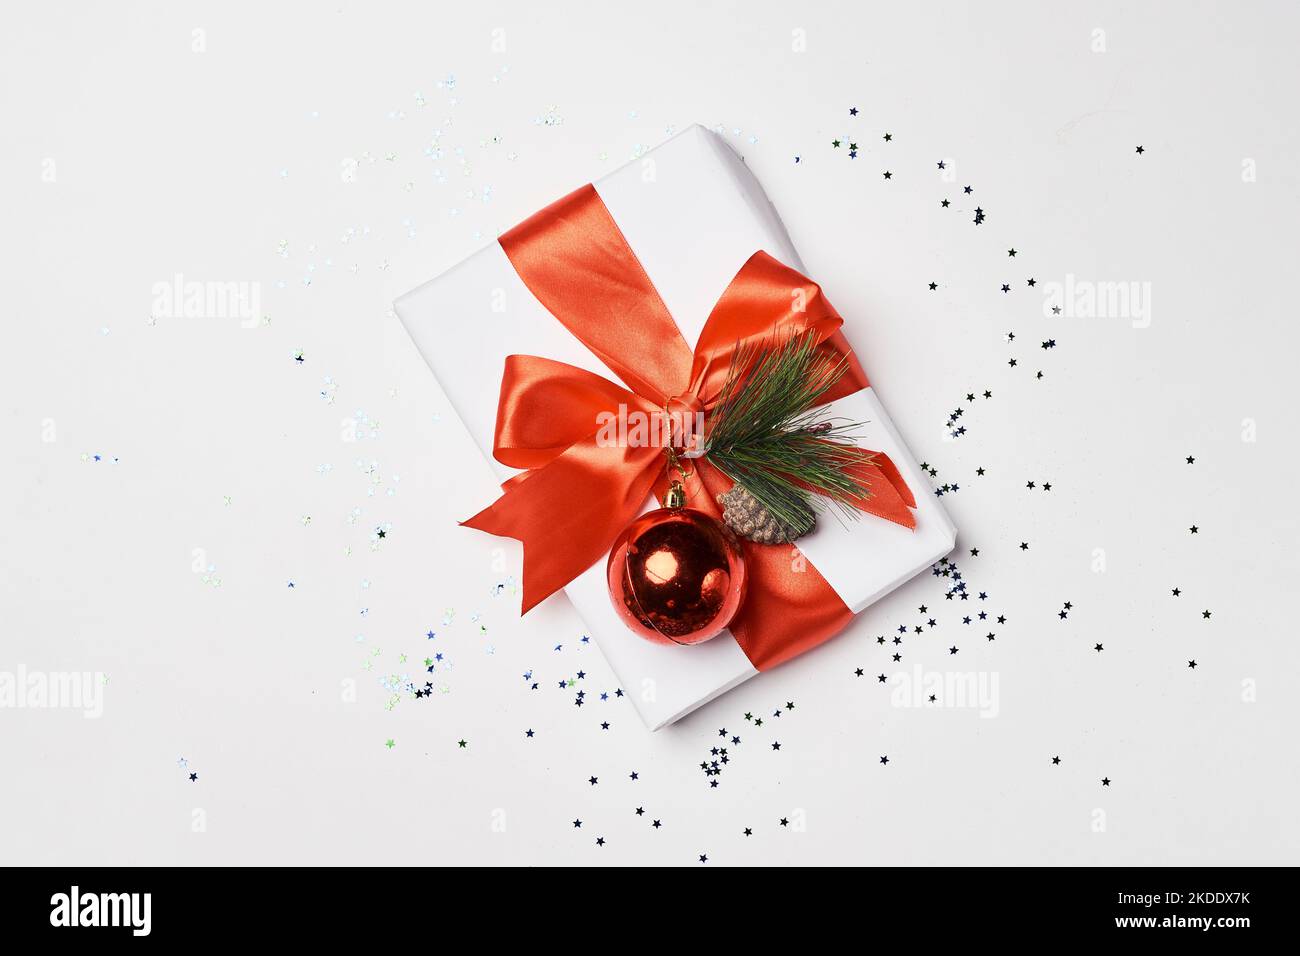 a christmas present wrapped in red ribbon and decorated with pine cones on a white surface surrounded by confe Stock Photo